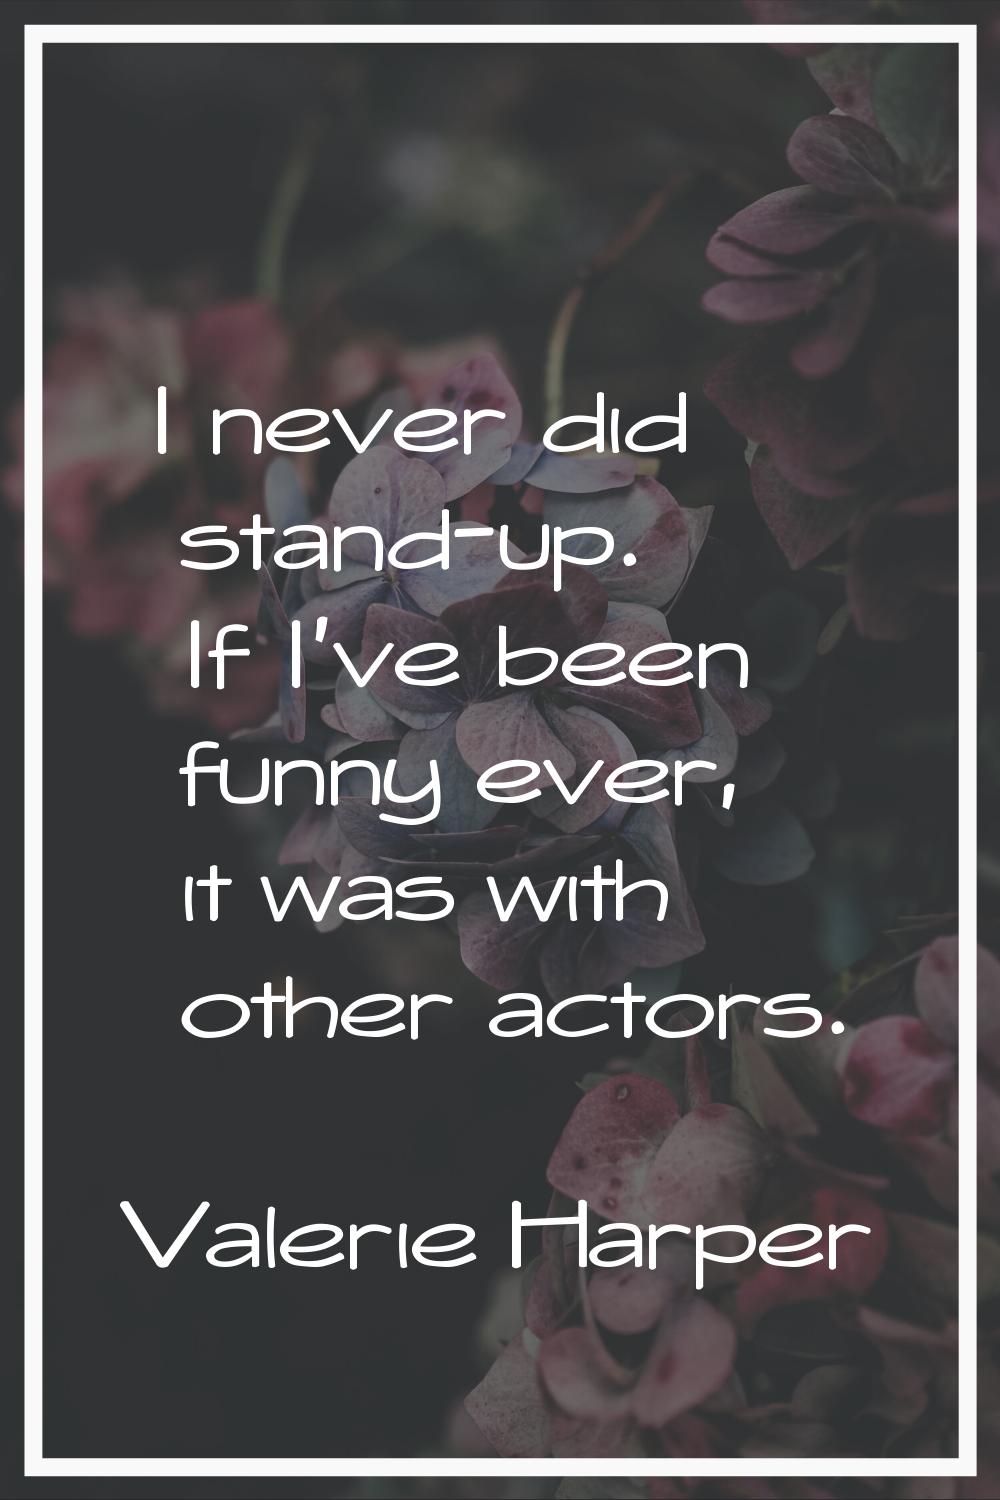 I never did stand-up. If I've been funny ever, it was with other actors.